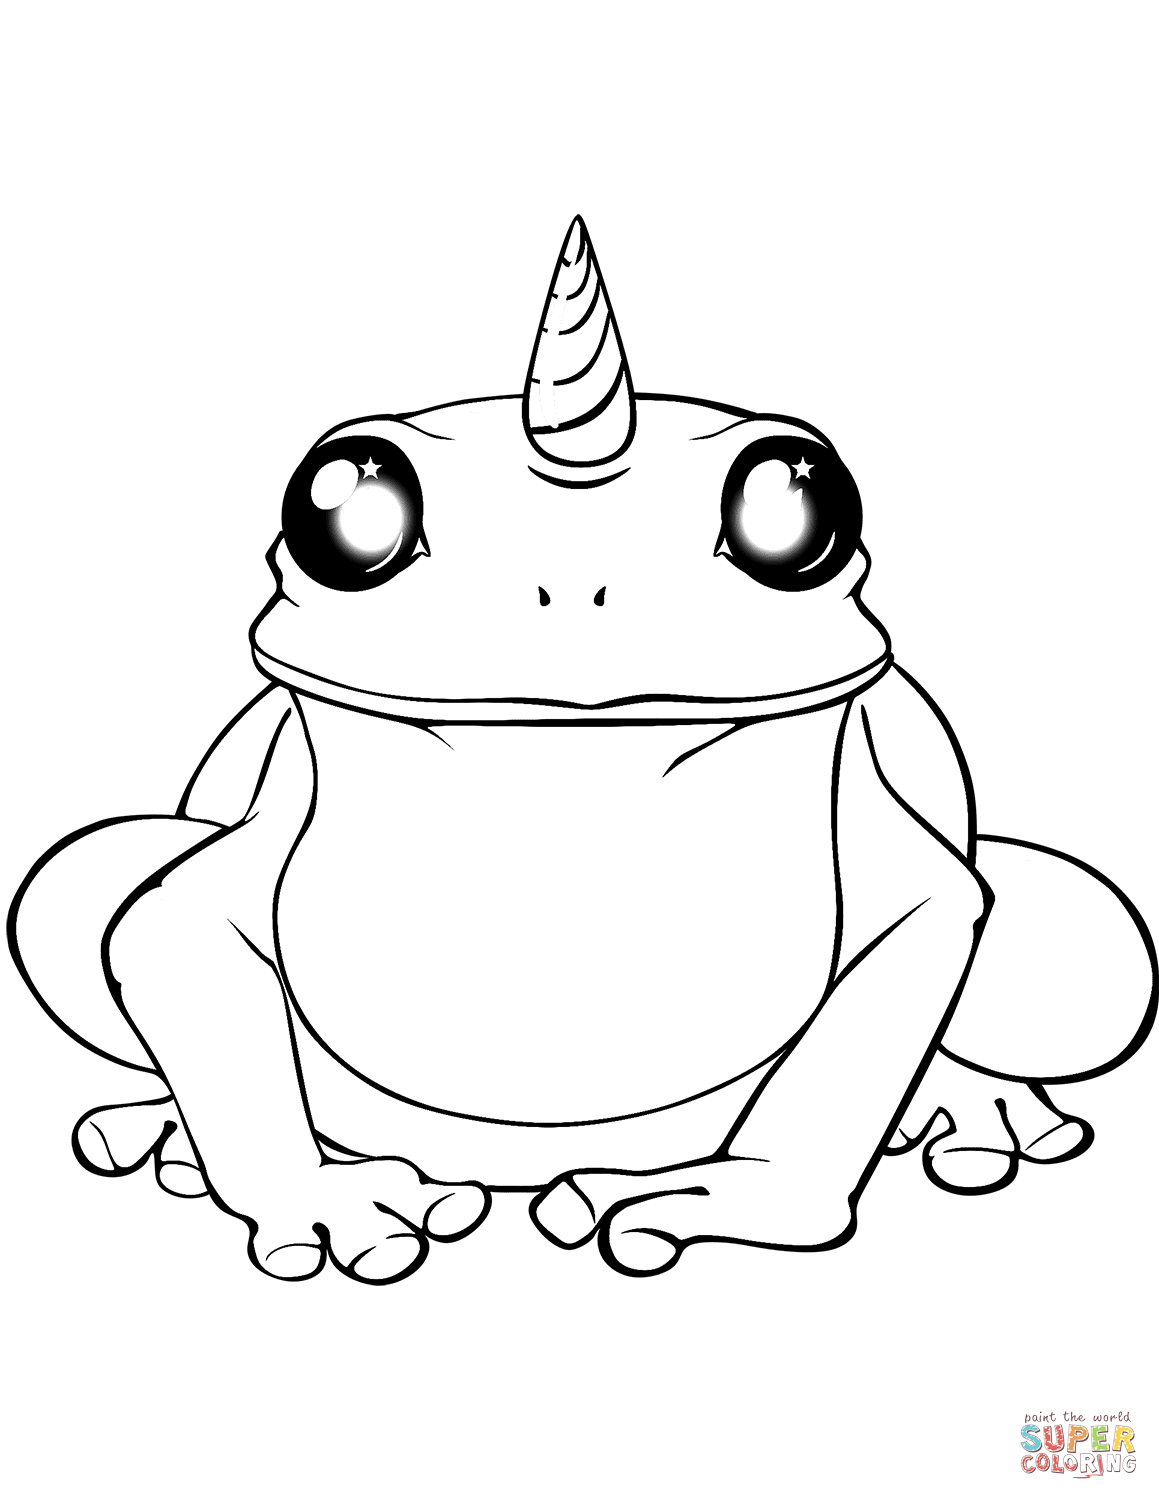 Unicorn frog coloring page free printable coloring pages